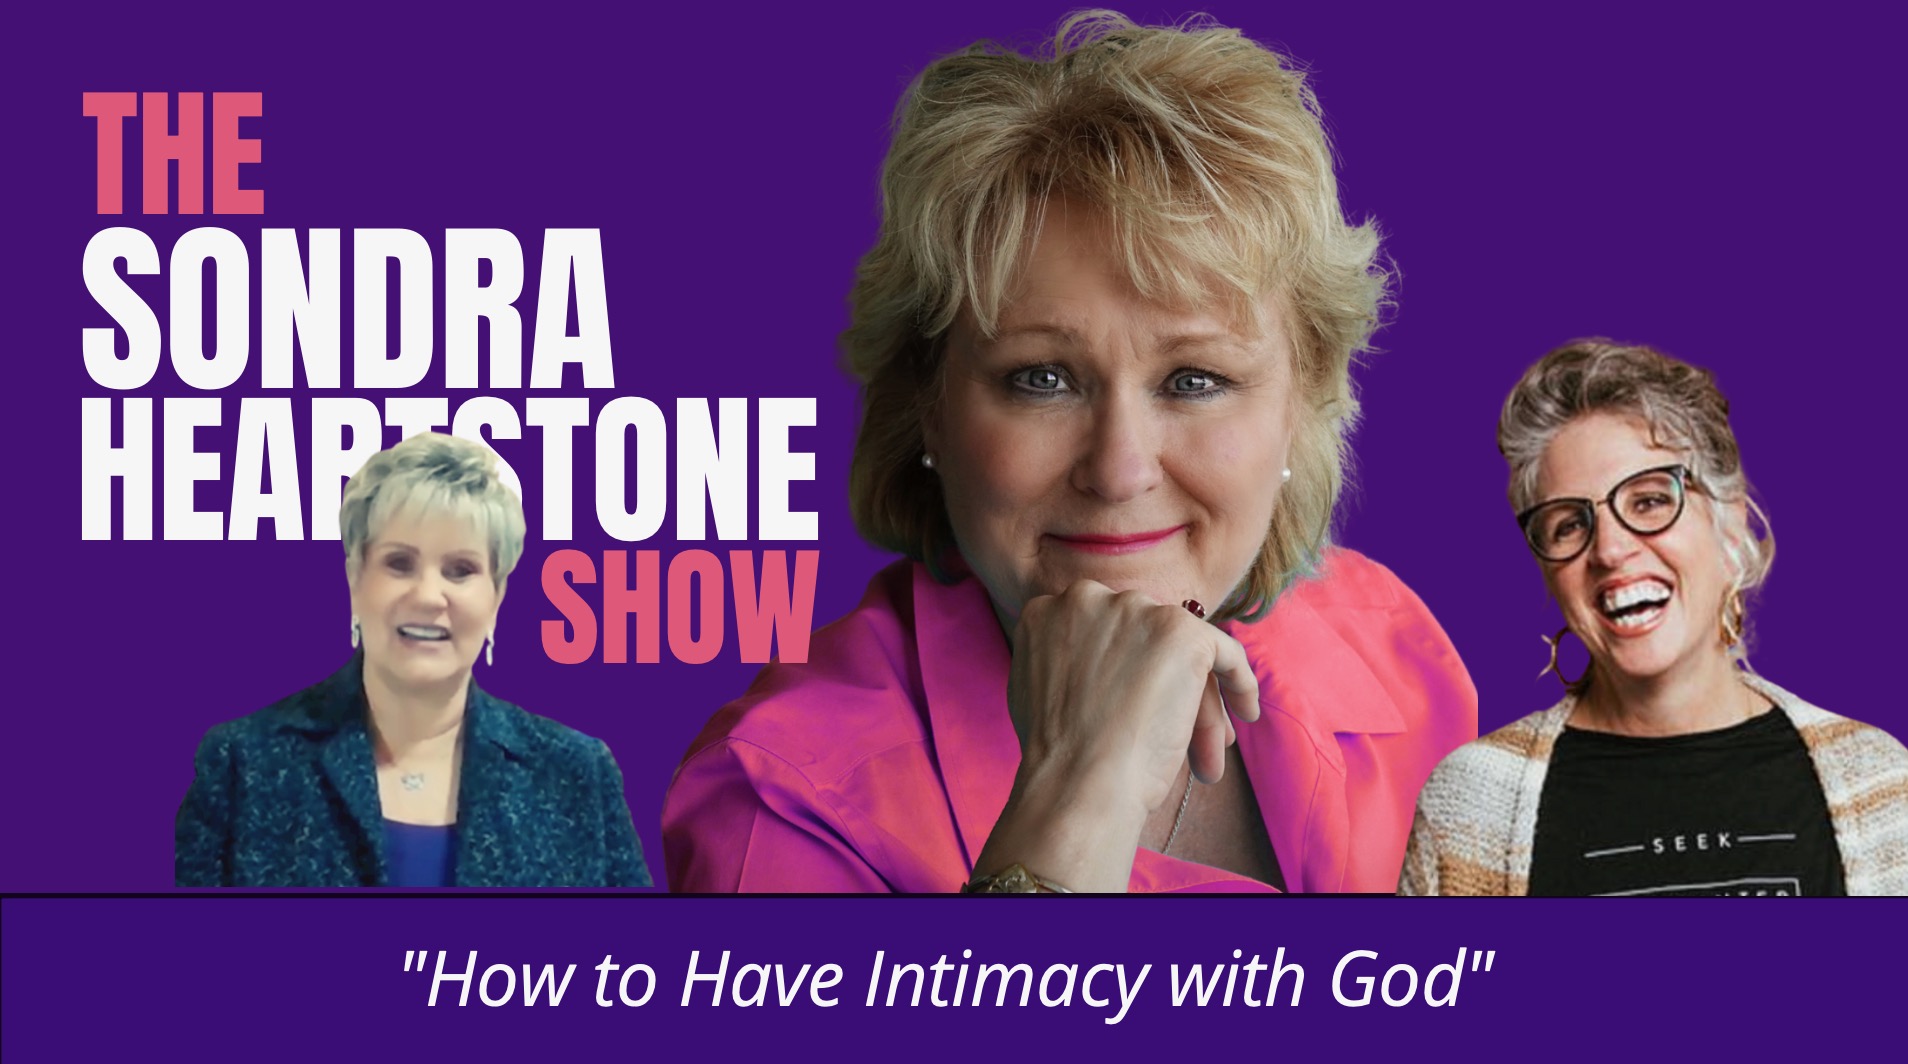 How to Have Intimacy with God